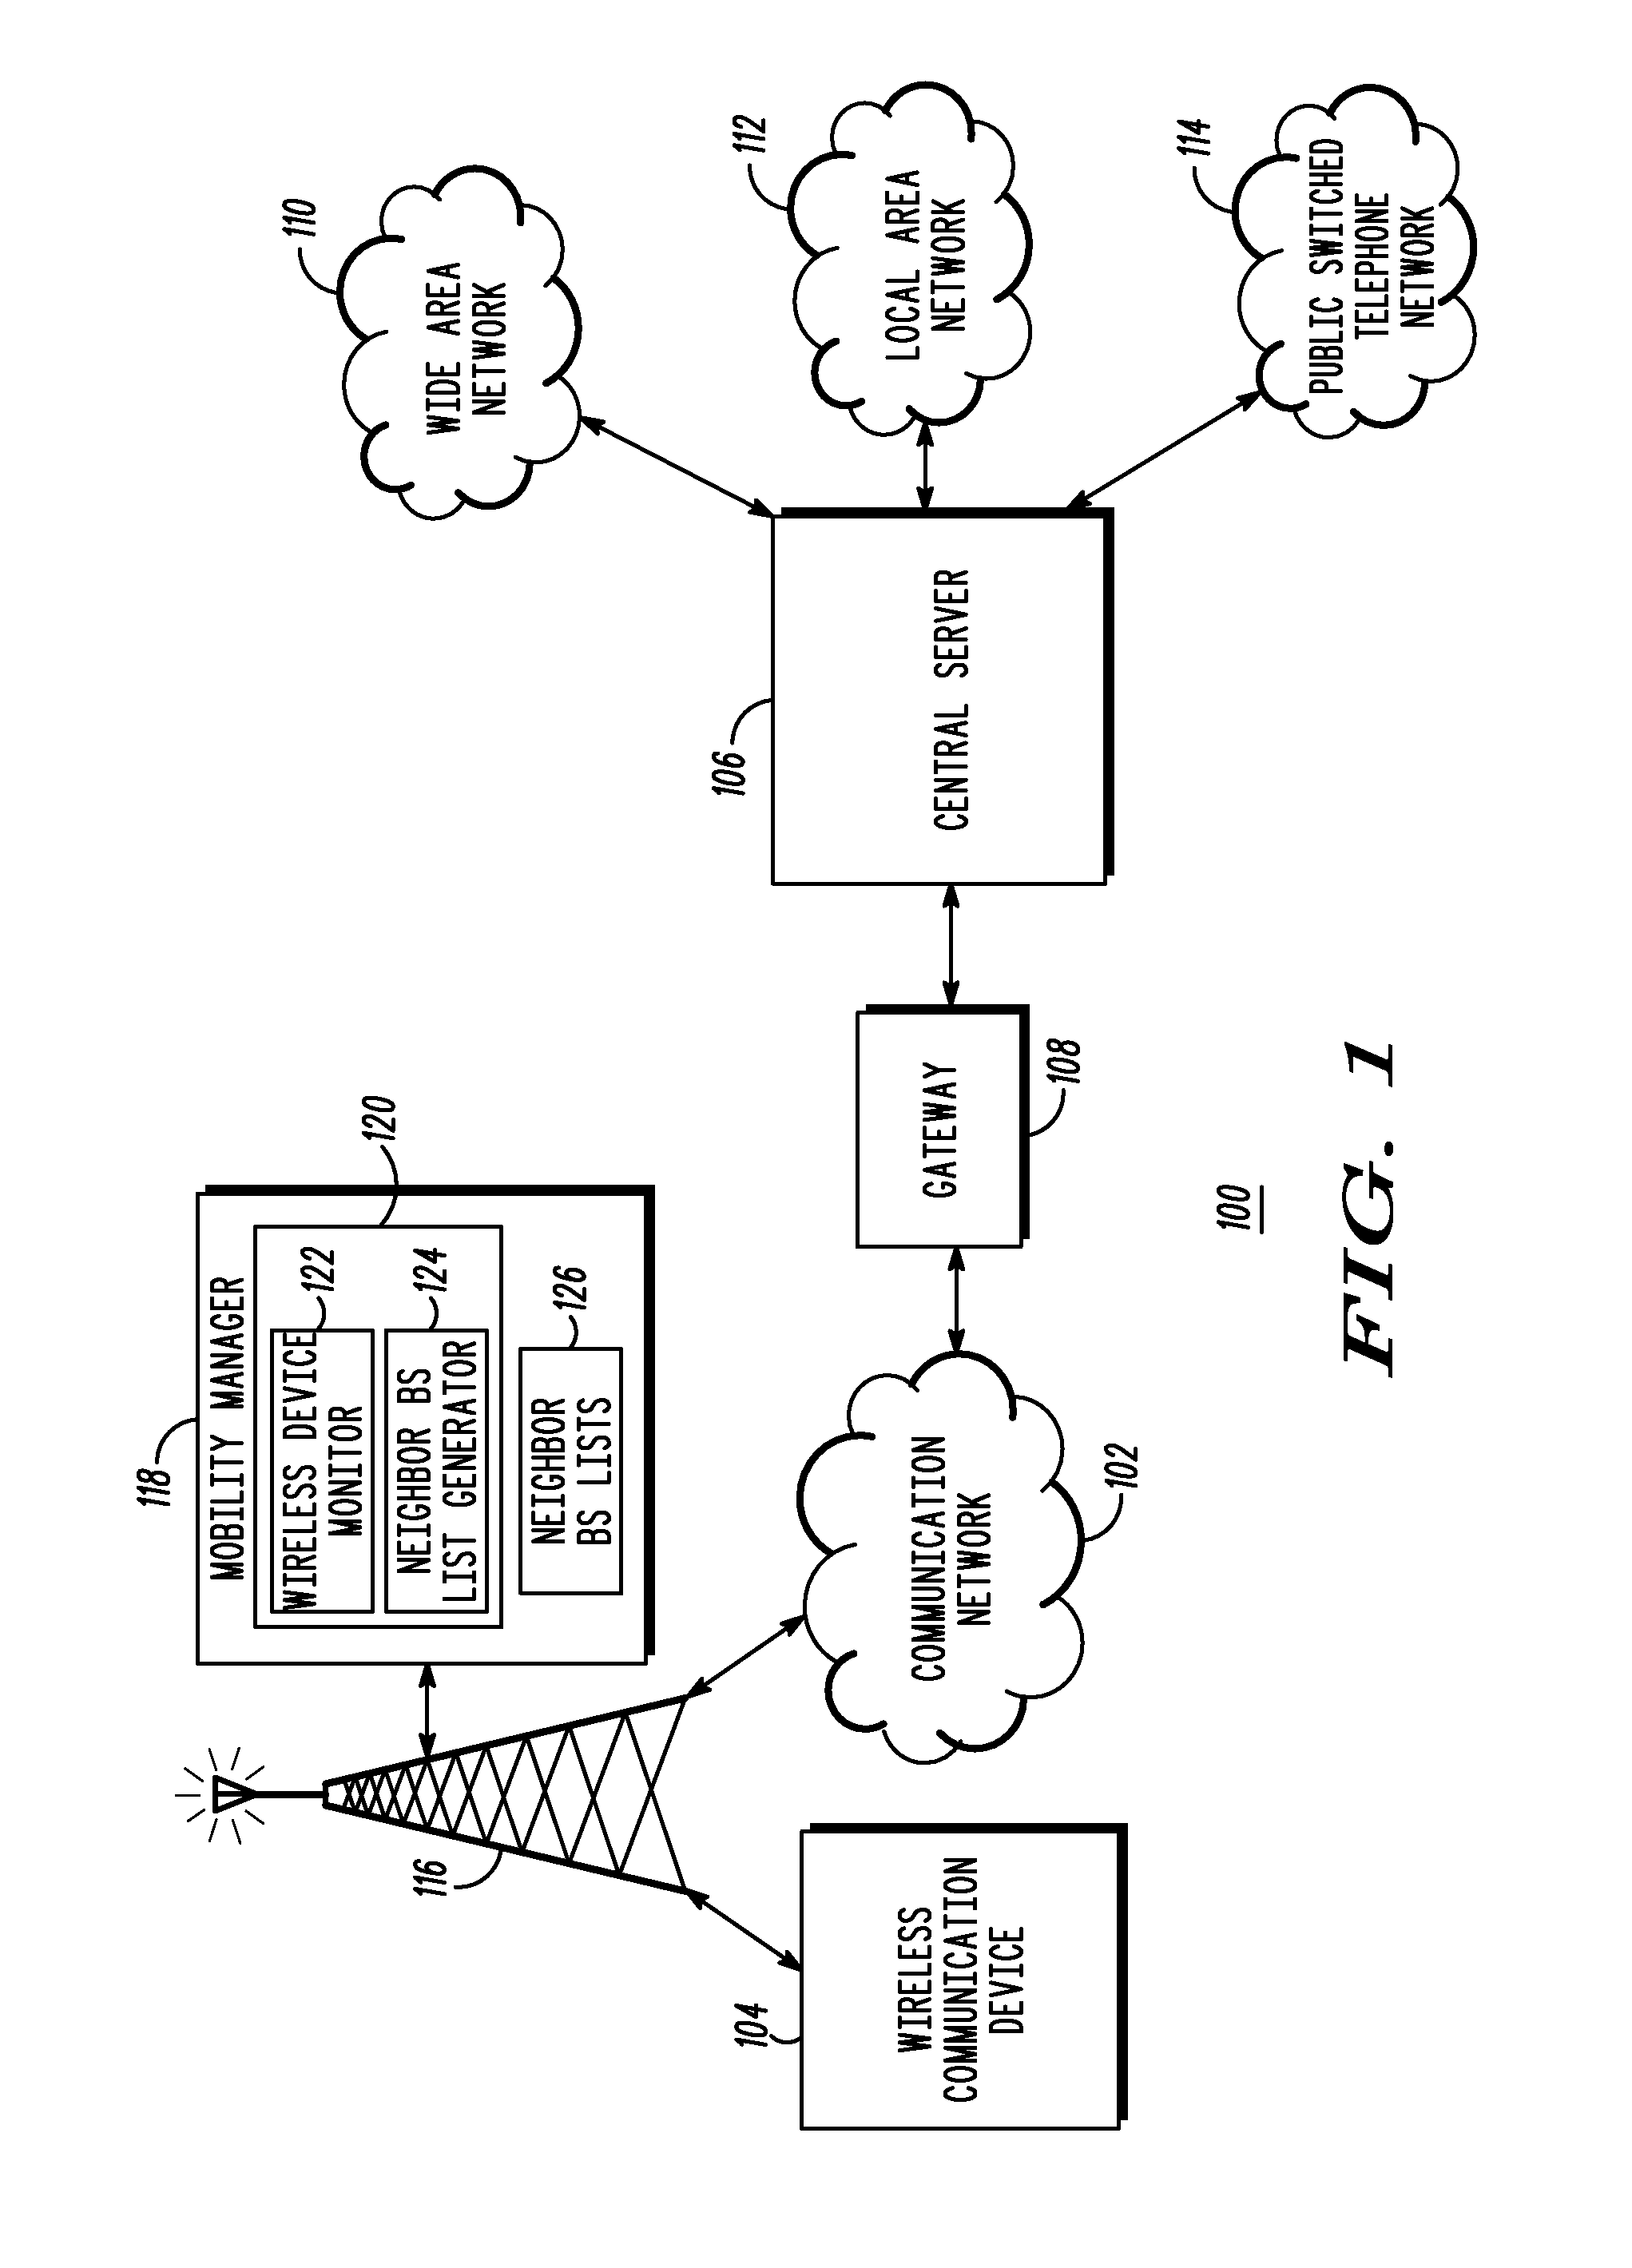 Seamless mobility for non-mobile internet protocol capable wireless devices in a time division duplex system